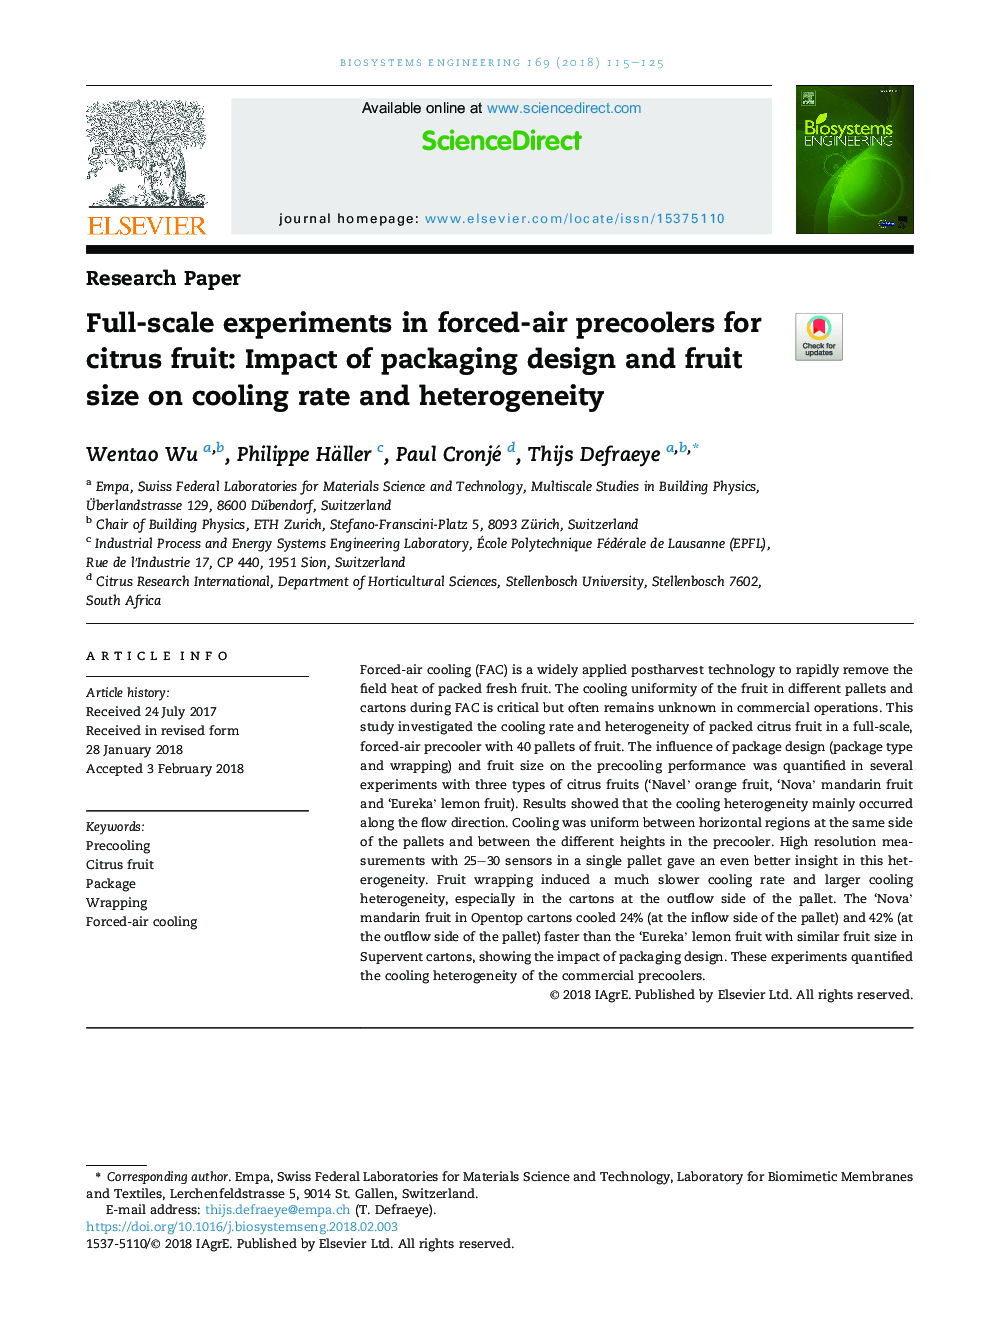 Full-scale experiments in forced-air precoolers for citrus fruit: Impact of packaging design and fruit size on cooling rate and heterogeneity